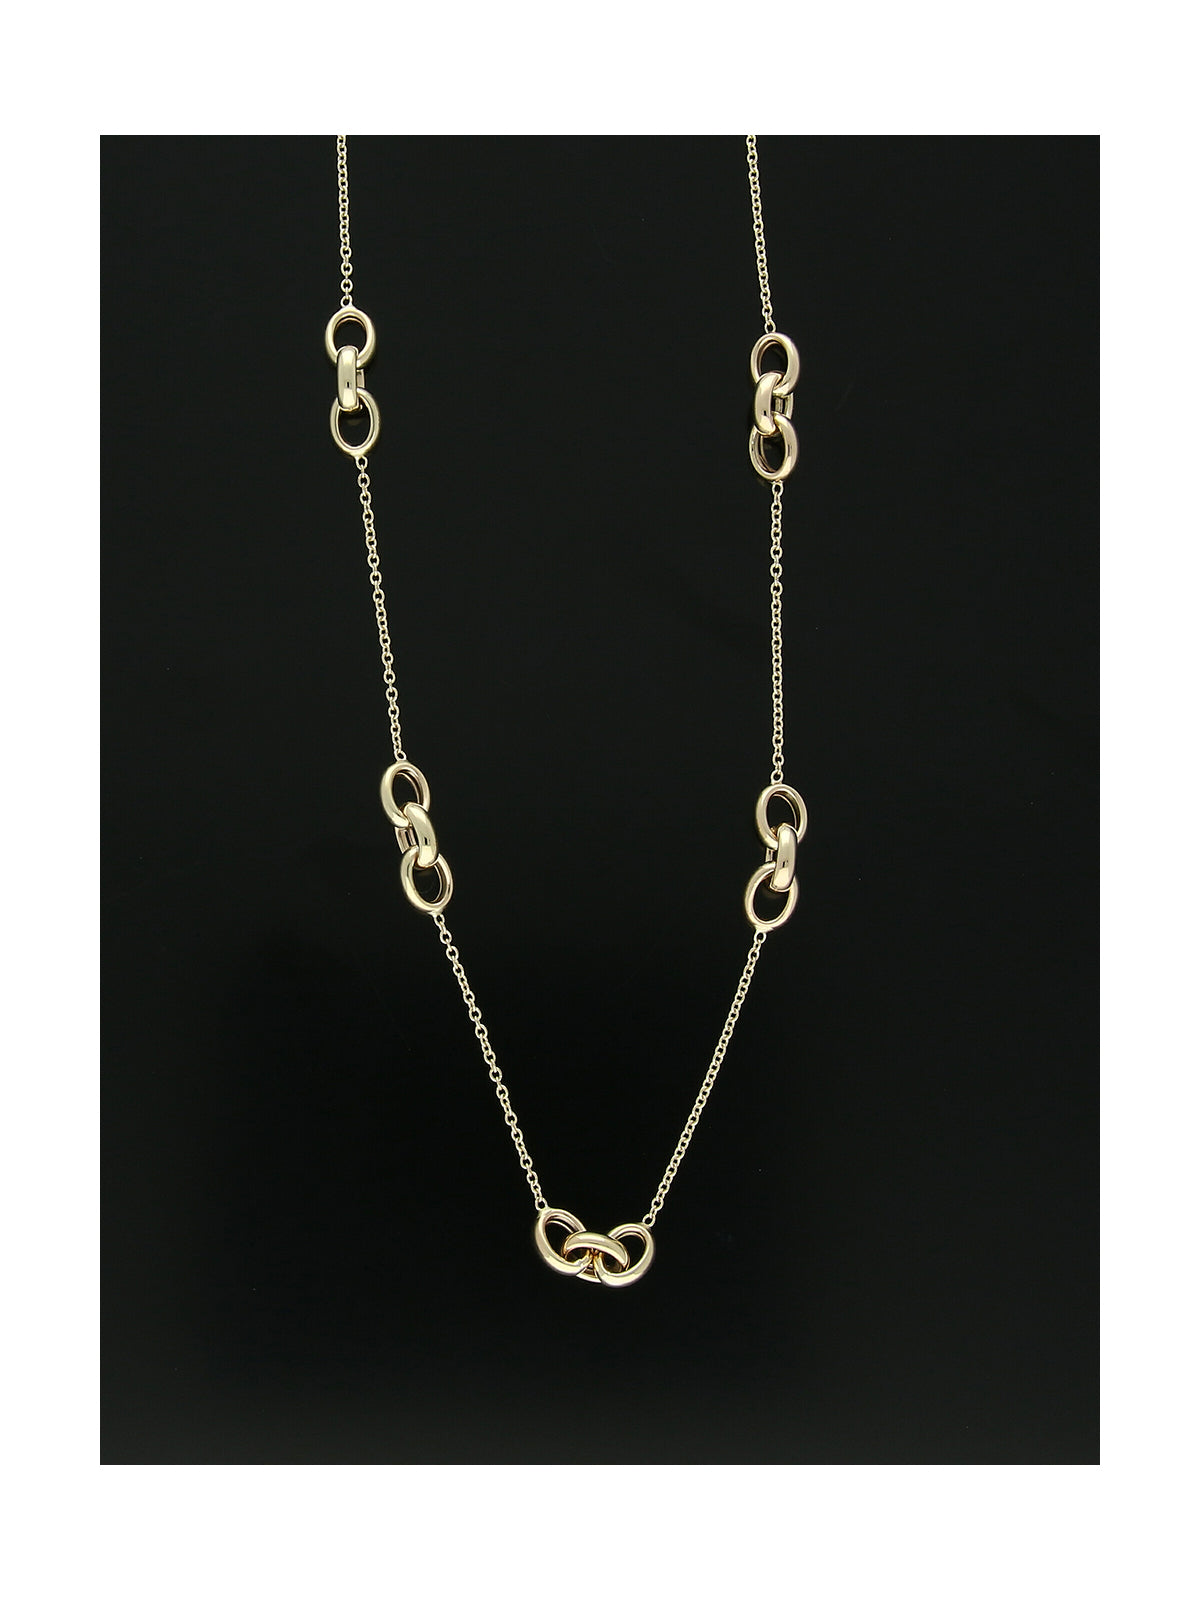 Triple Loop Chain Necklace in 9ct Yellow Gold